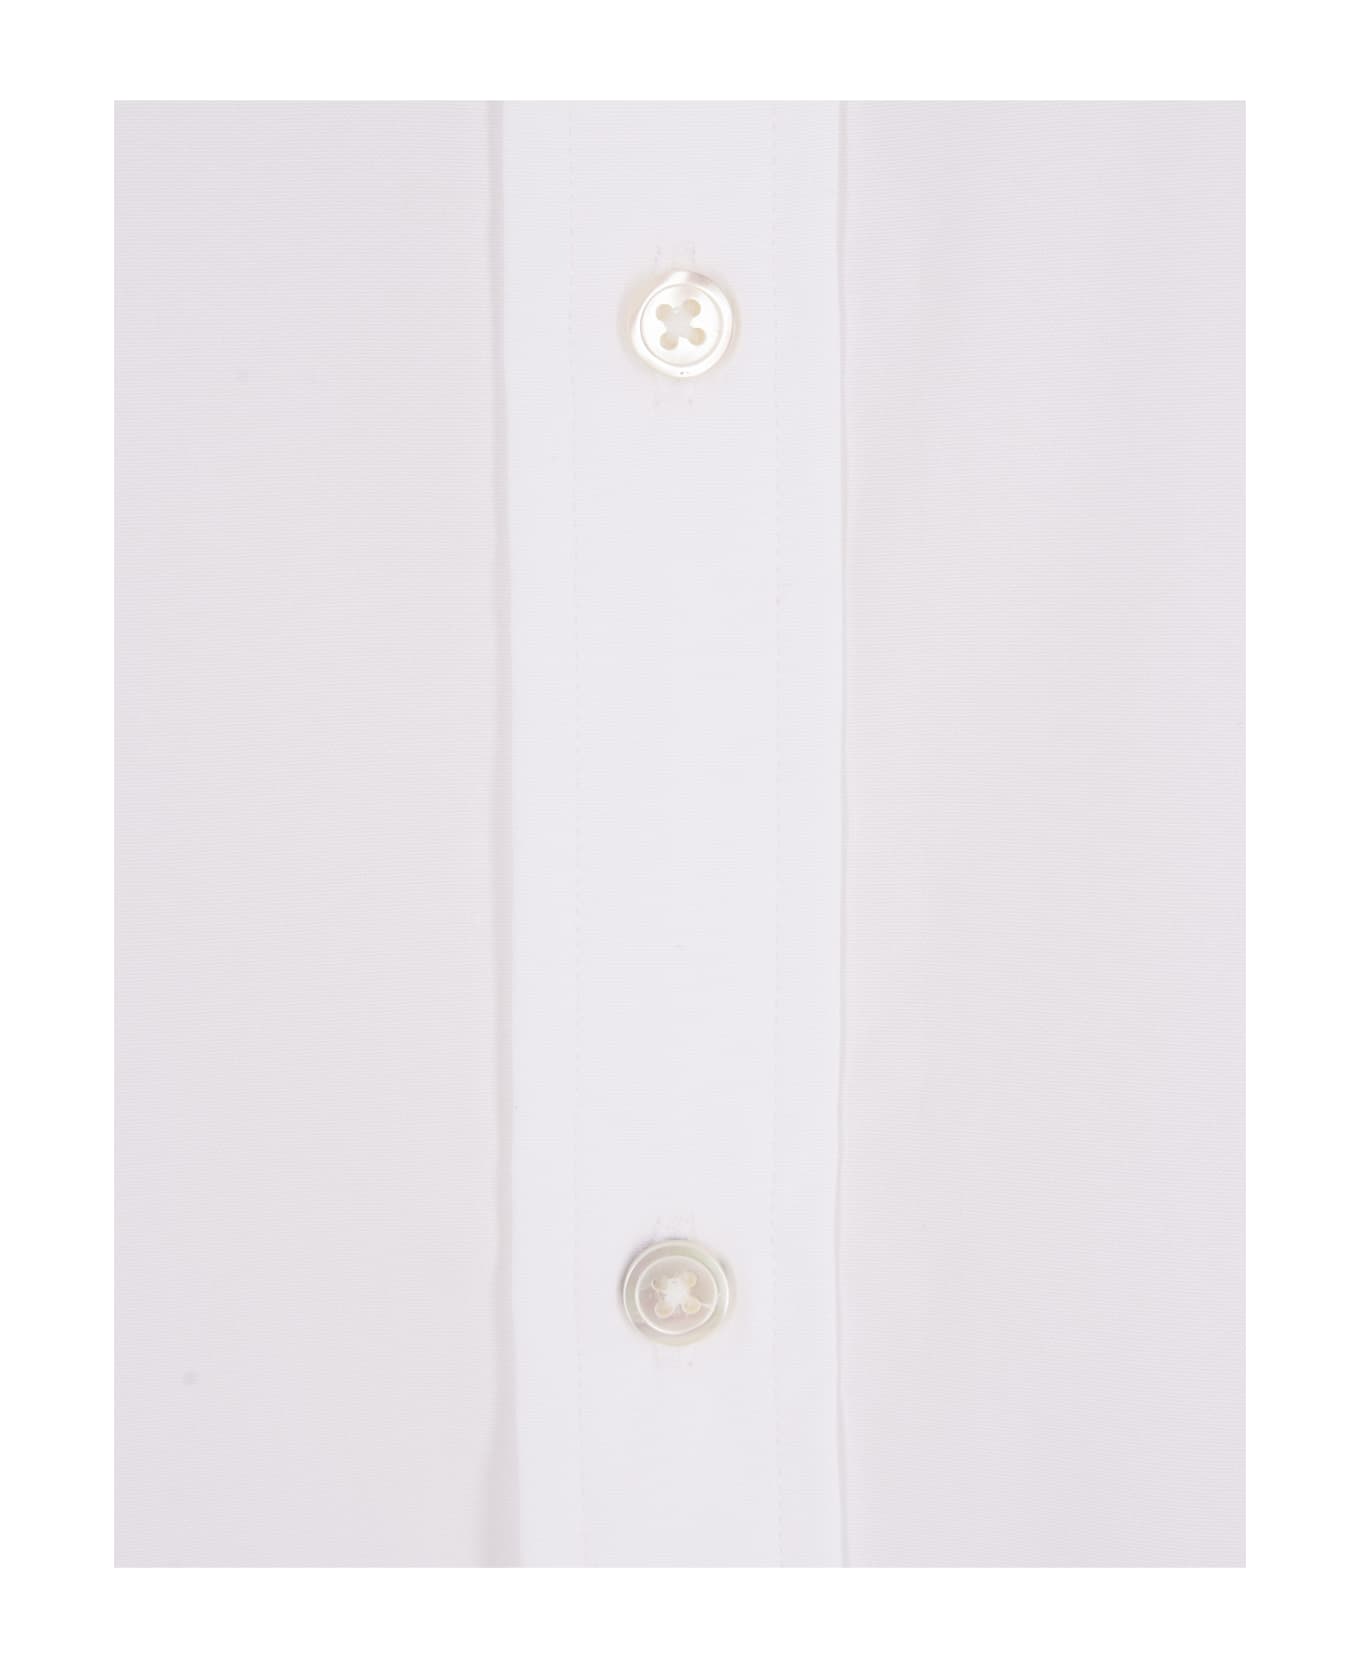 Ralph Lauren White Cotton Relaxed-fit Shirt With Contrasting Pony - White